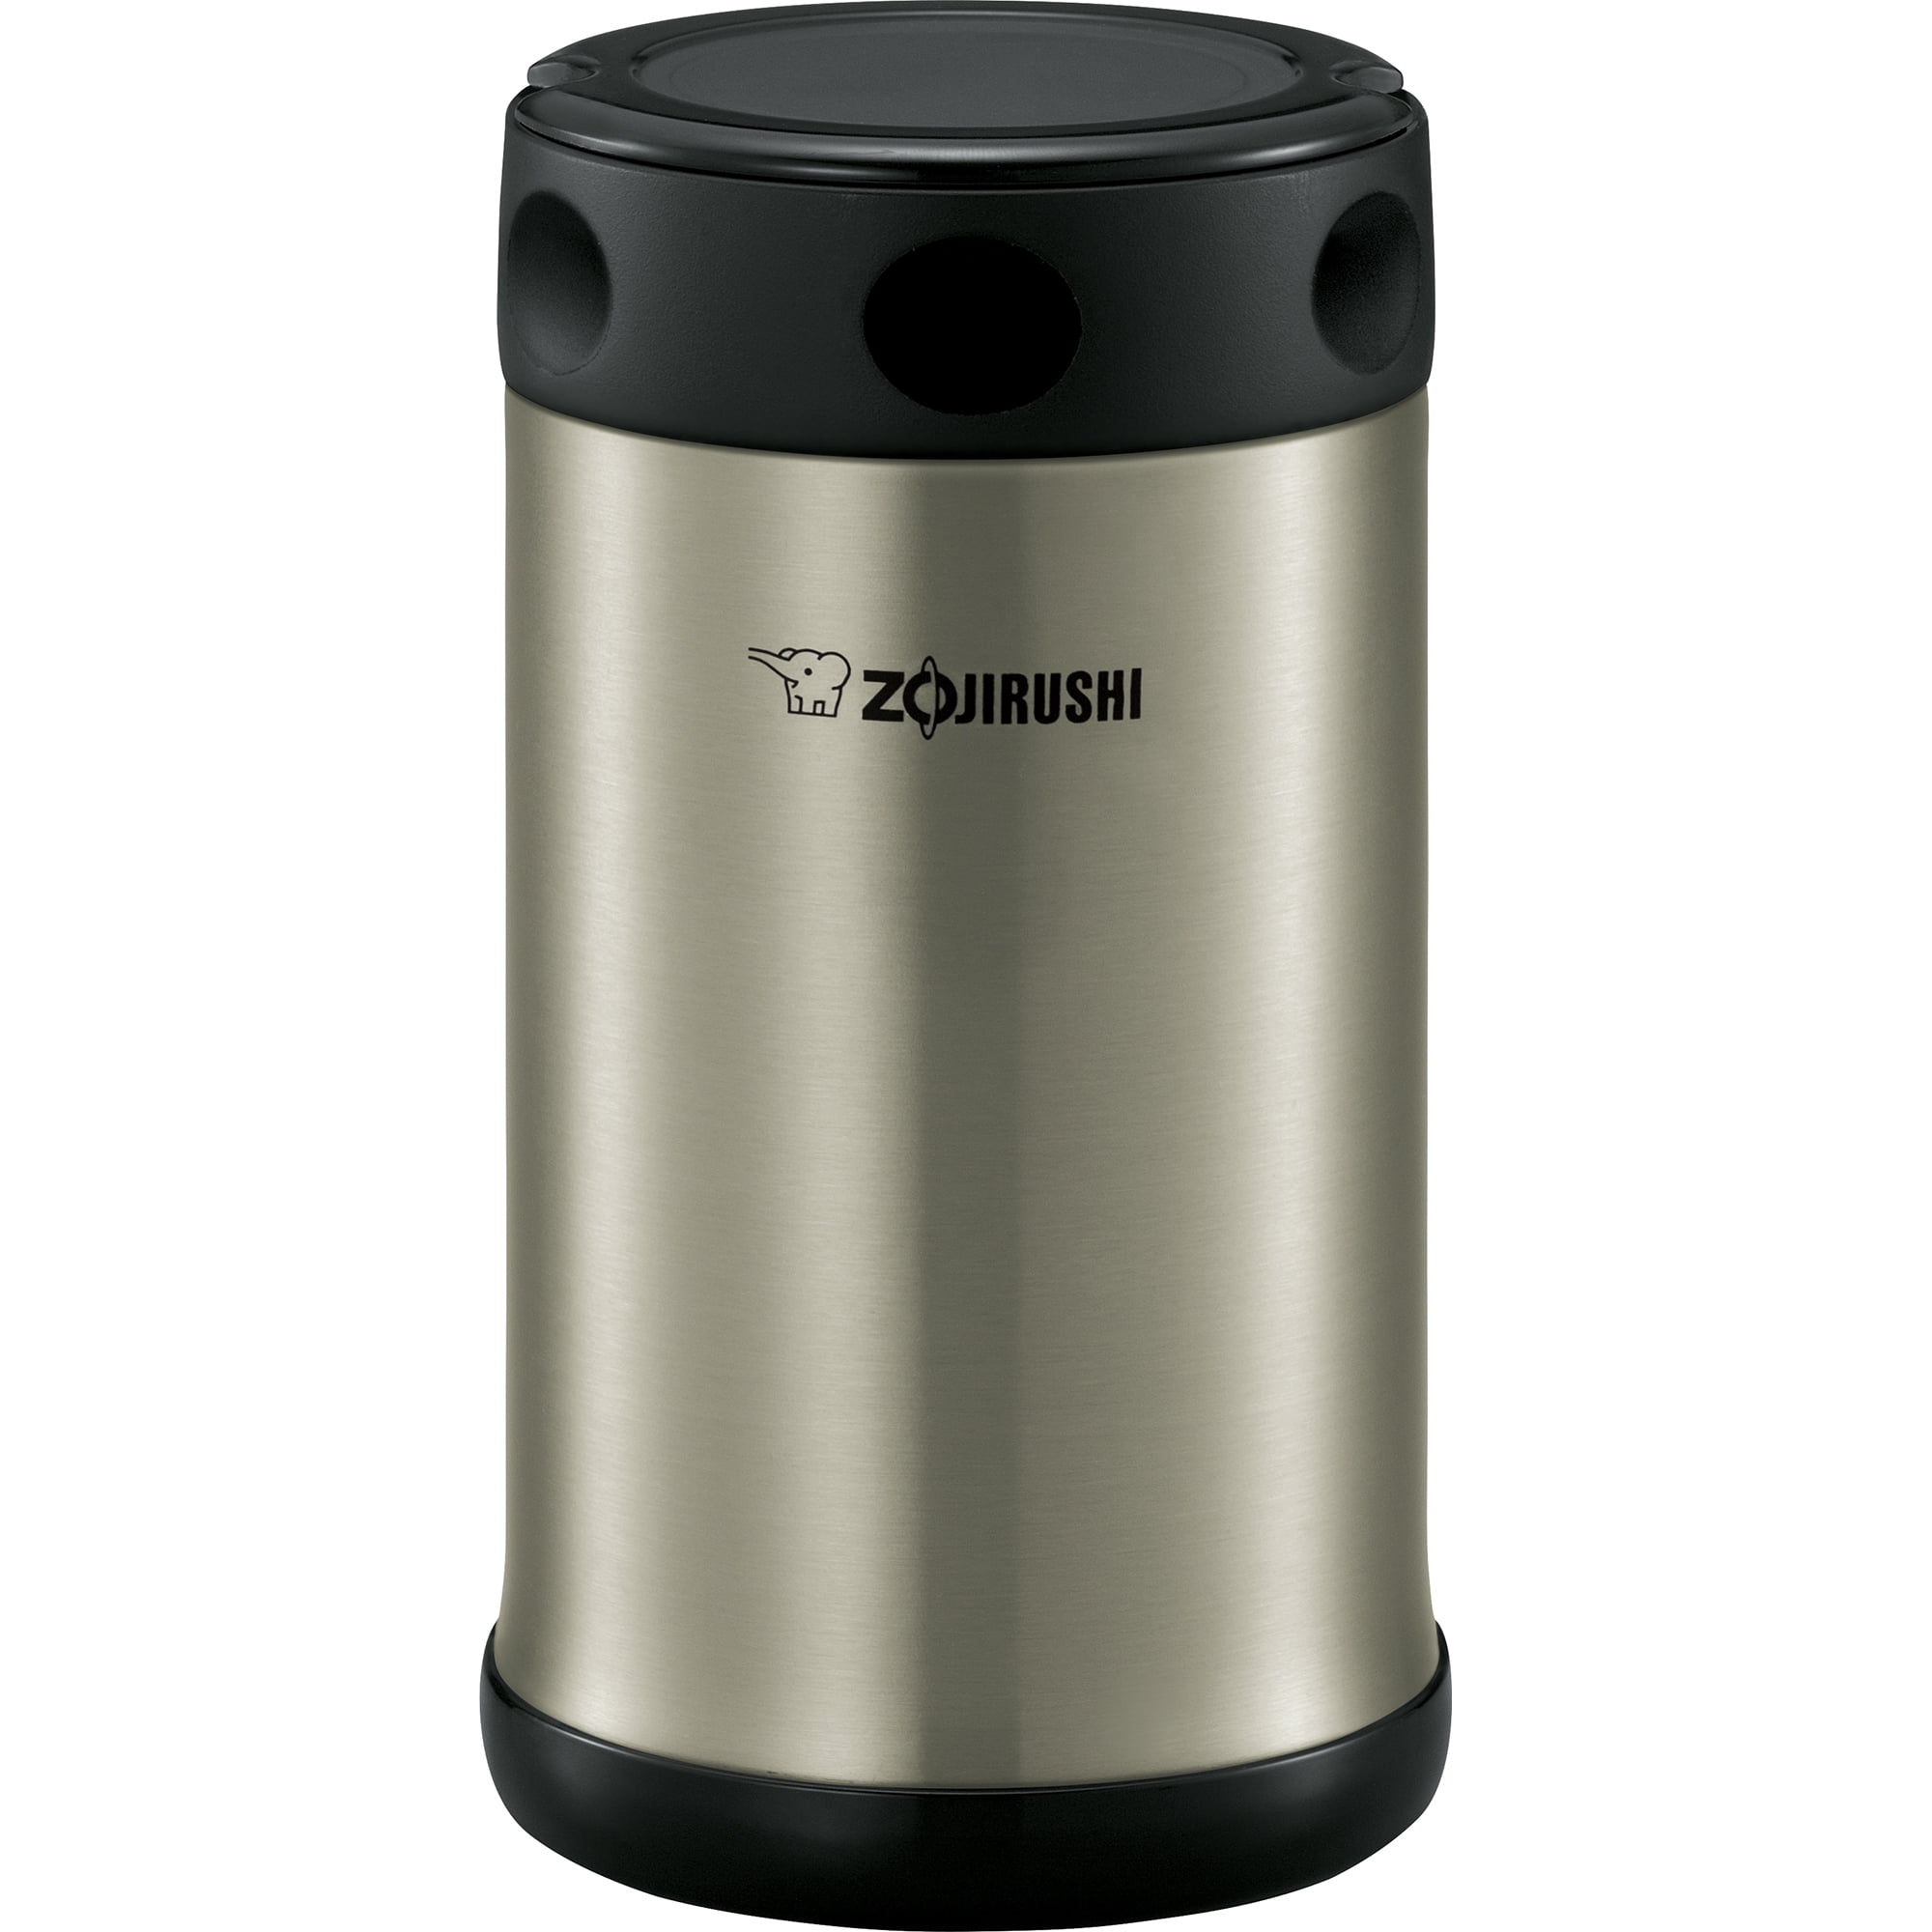  Zojirushi Steel Food Jar, 11.8-Ounce, Black/Stainless: Home &  Kitchen